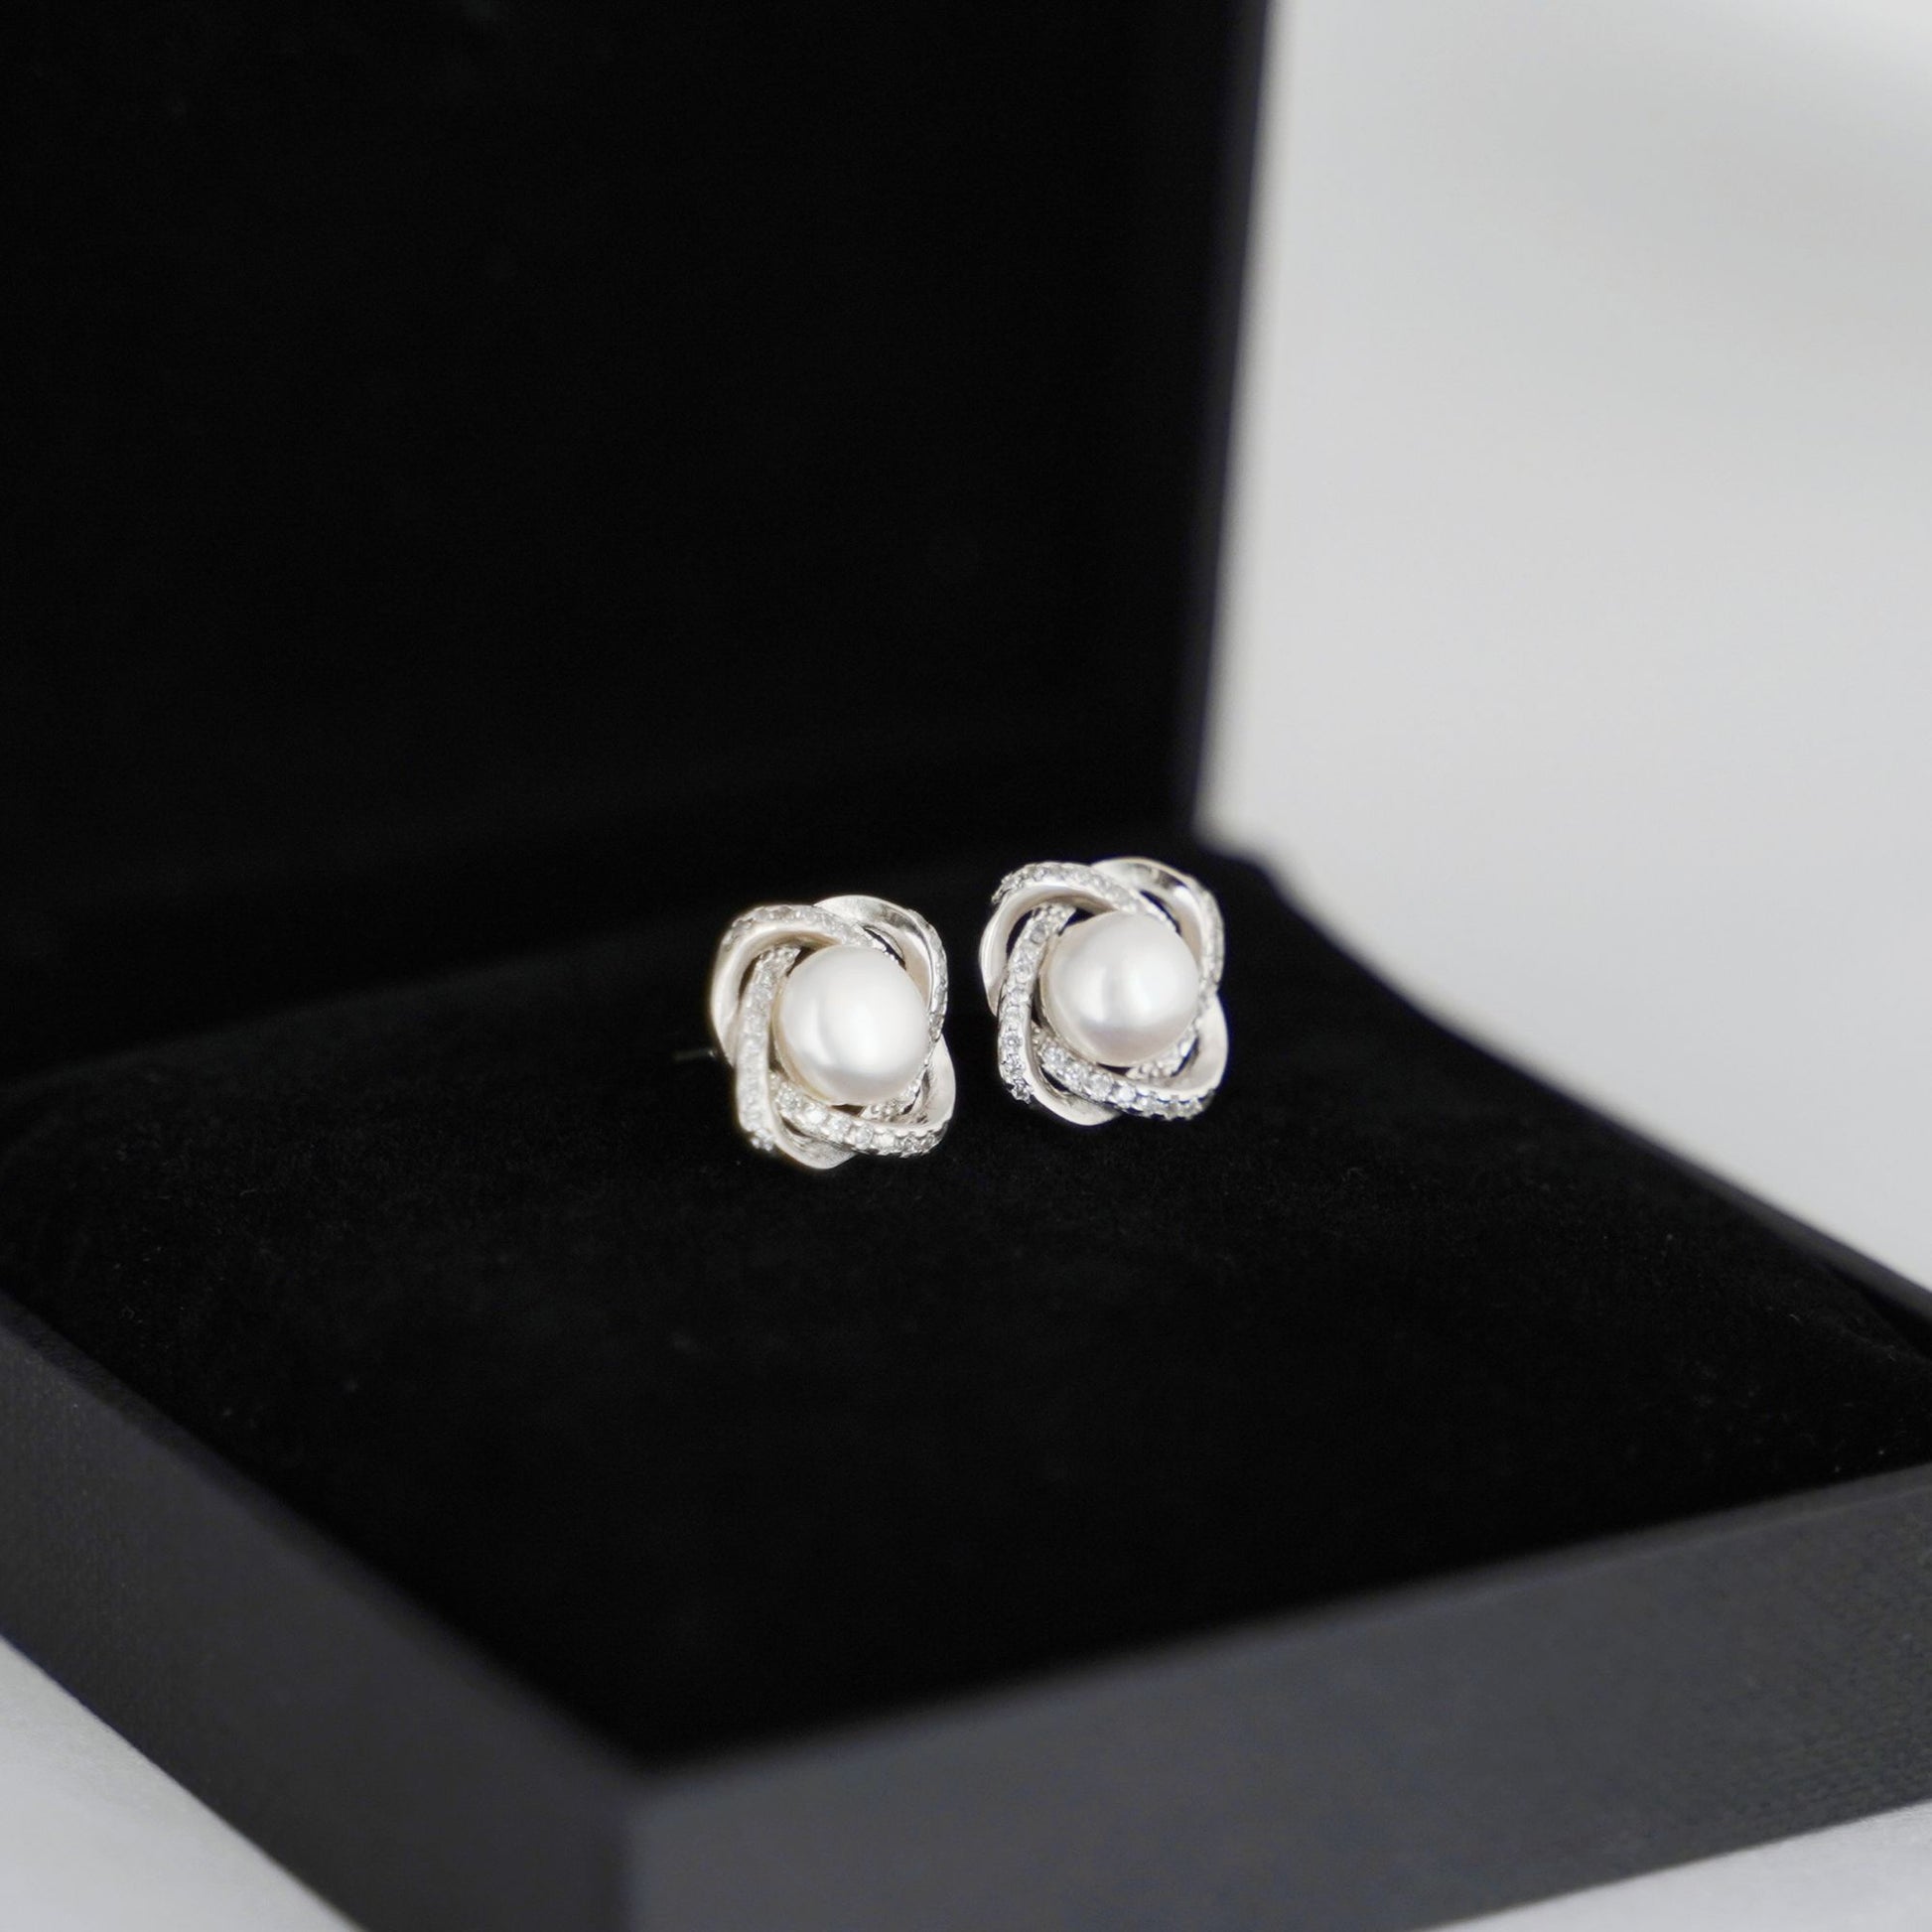 Sterling Silver Freshwater Pearl Stud Earrings with CZ Knots - 7mm White Button Pearls - sugarkittenlondon